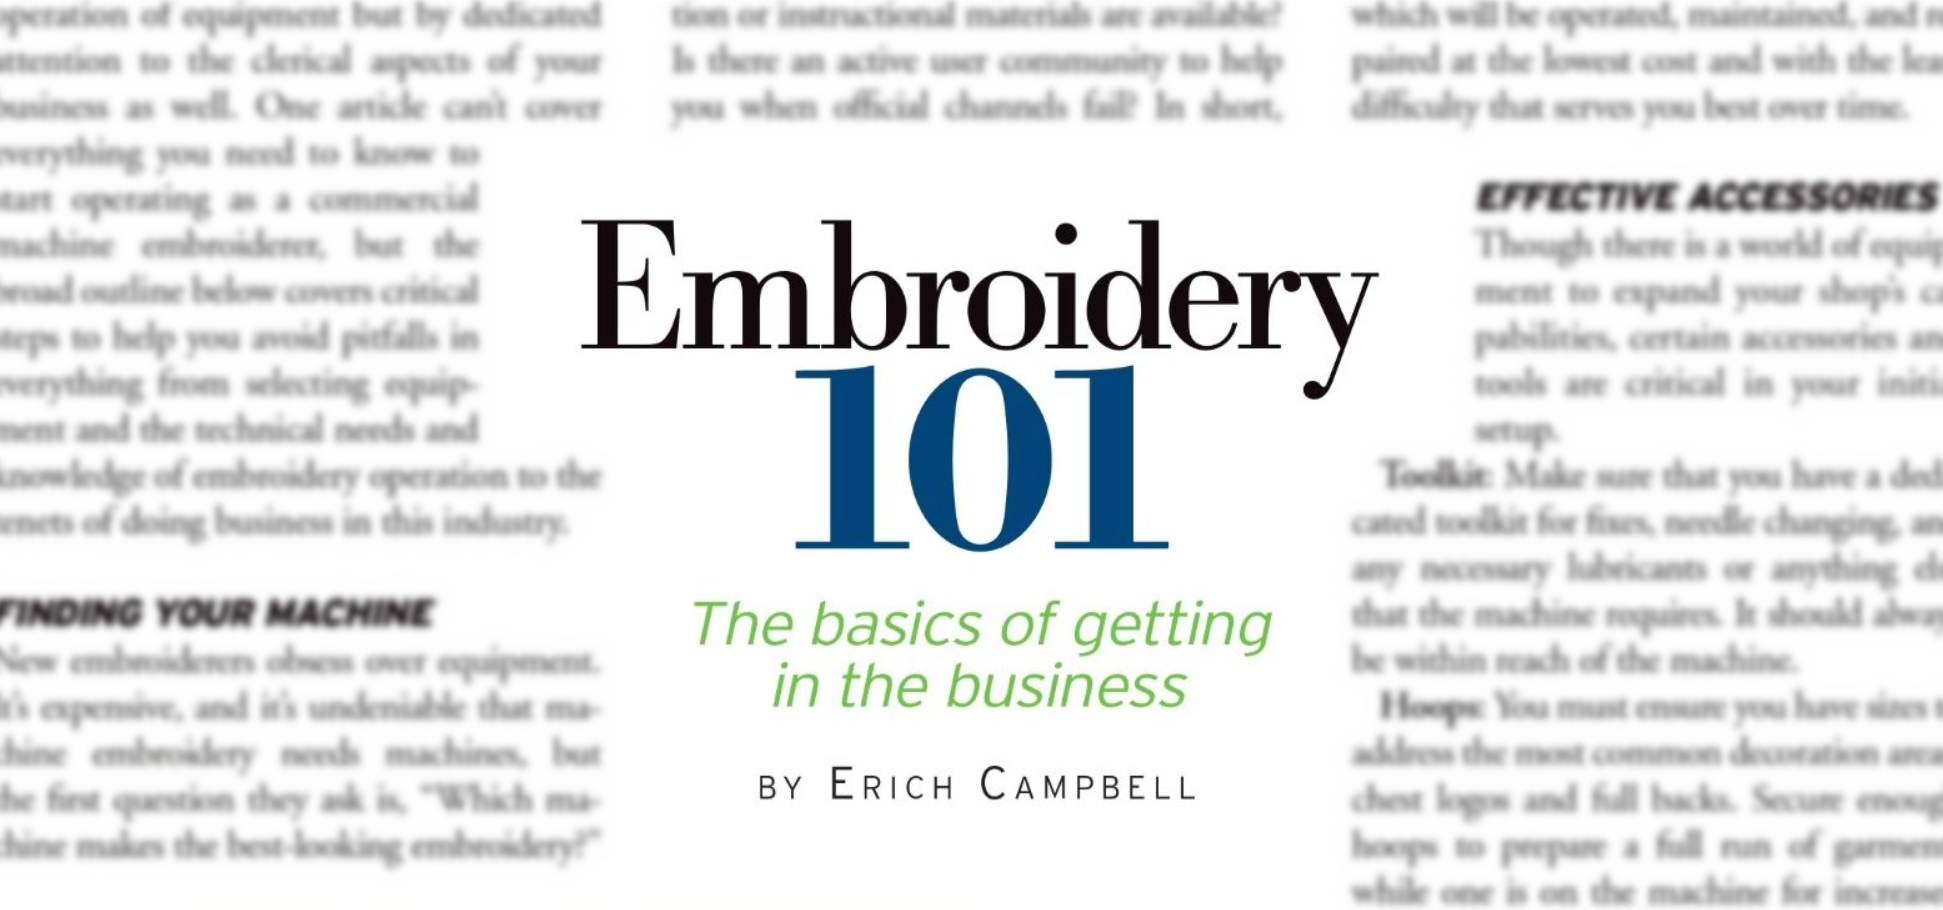 Embroidery 101 Article by Erich Campbell in Printwear Magazine